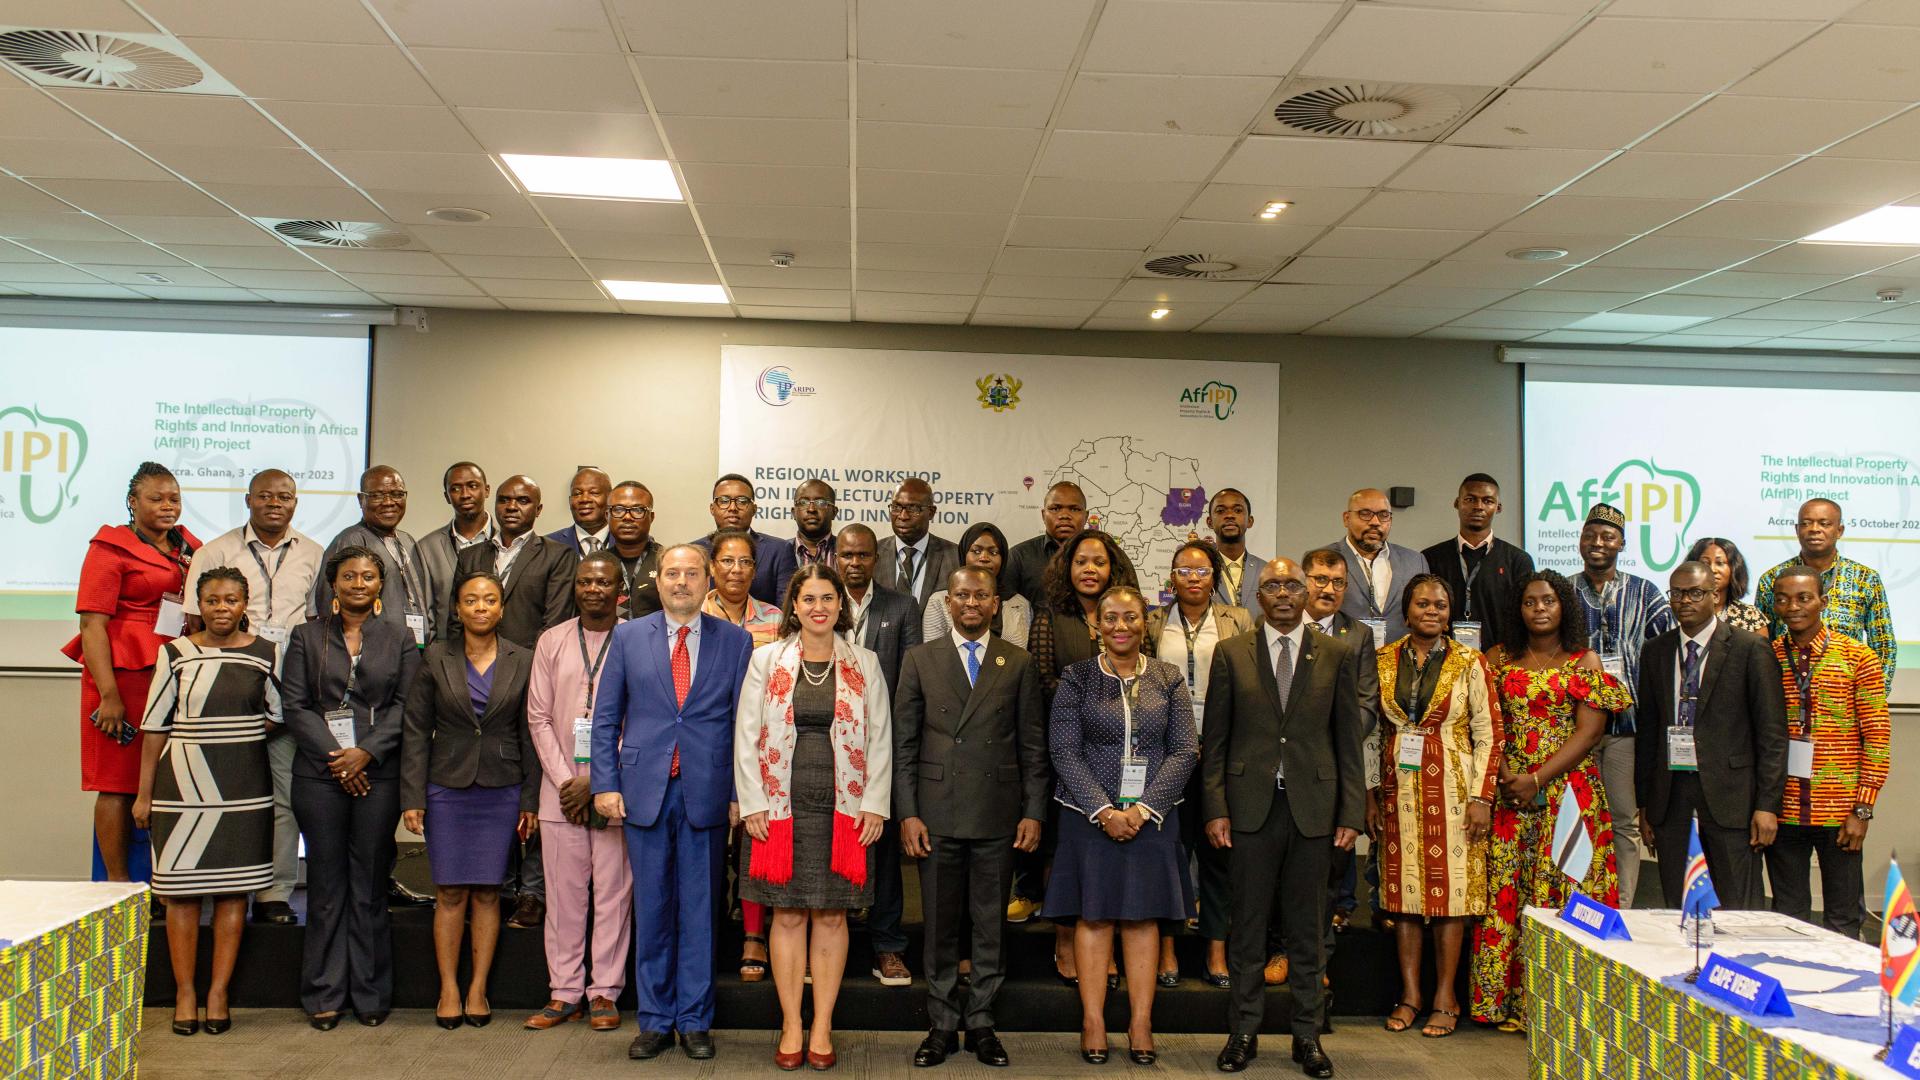 Regional Workshop Promoting Innovation and Intellectual Property Rights in ARIPO Member States